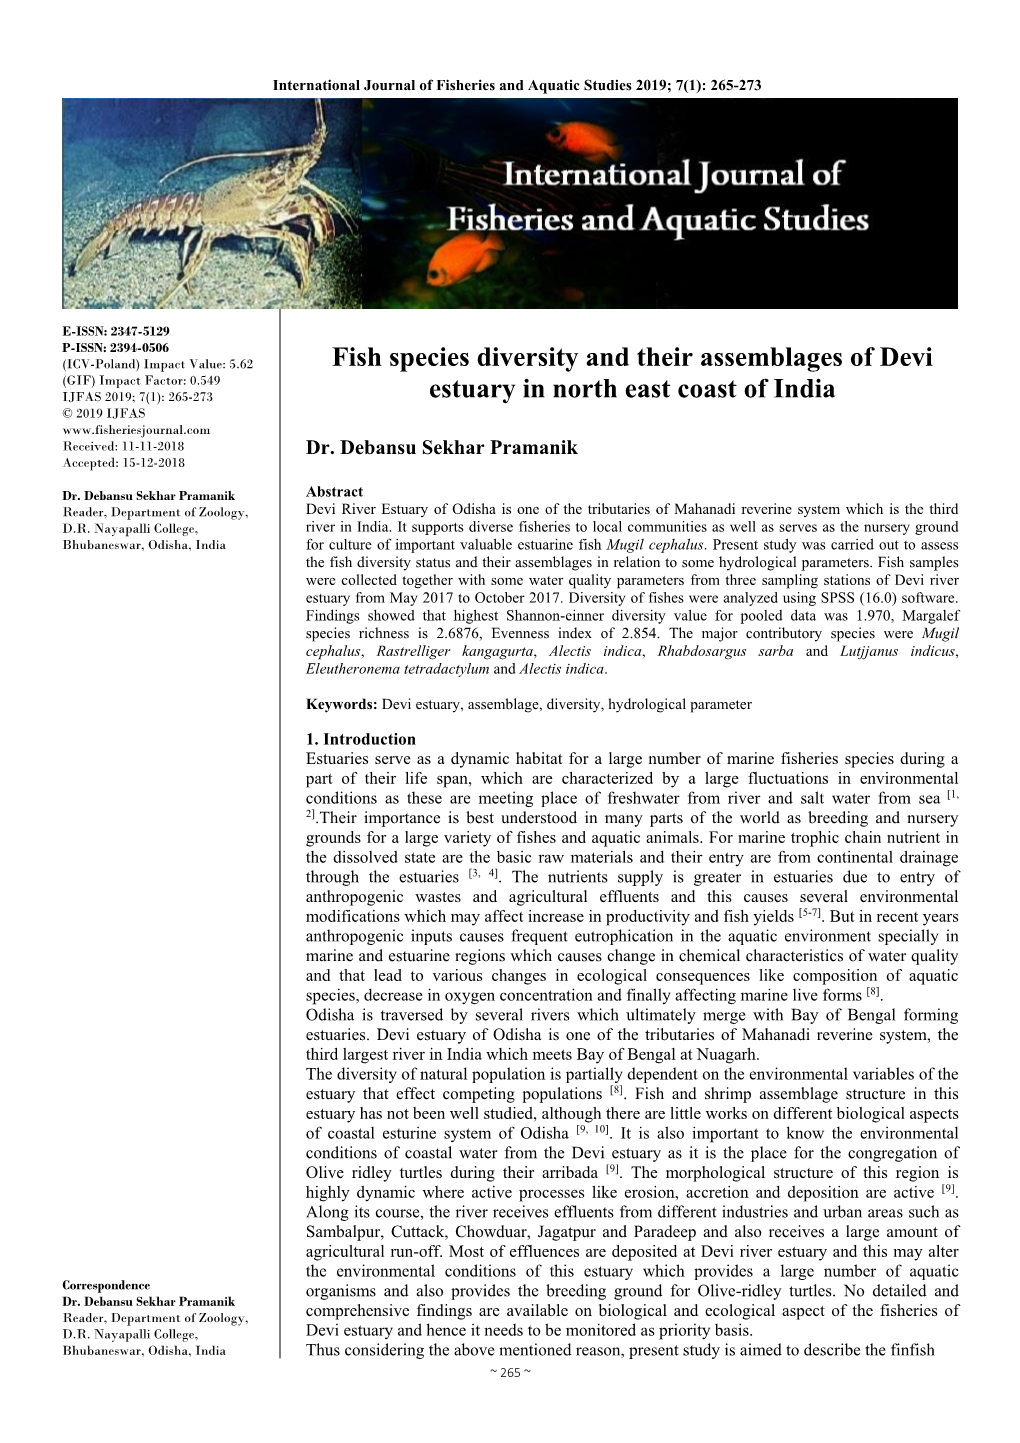 Fish Species Diversity and Their Assemblages of Devi Estuary In